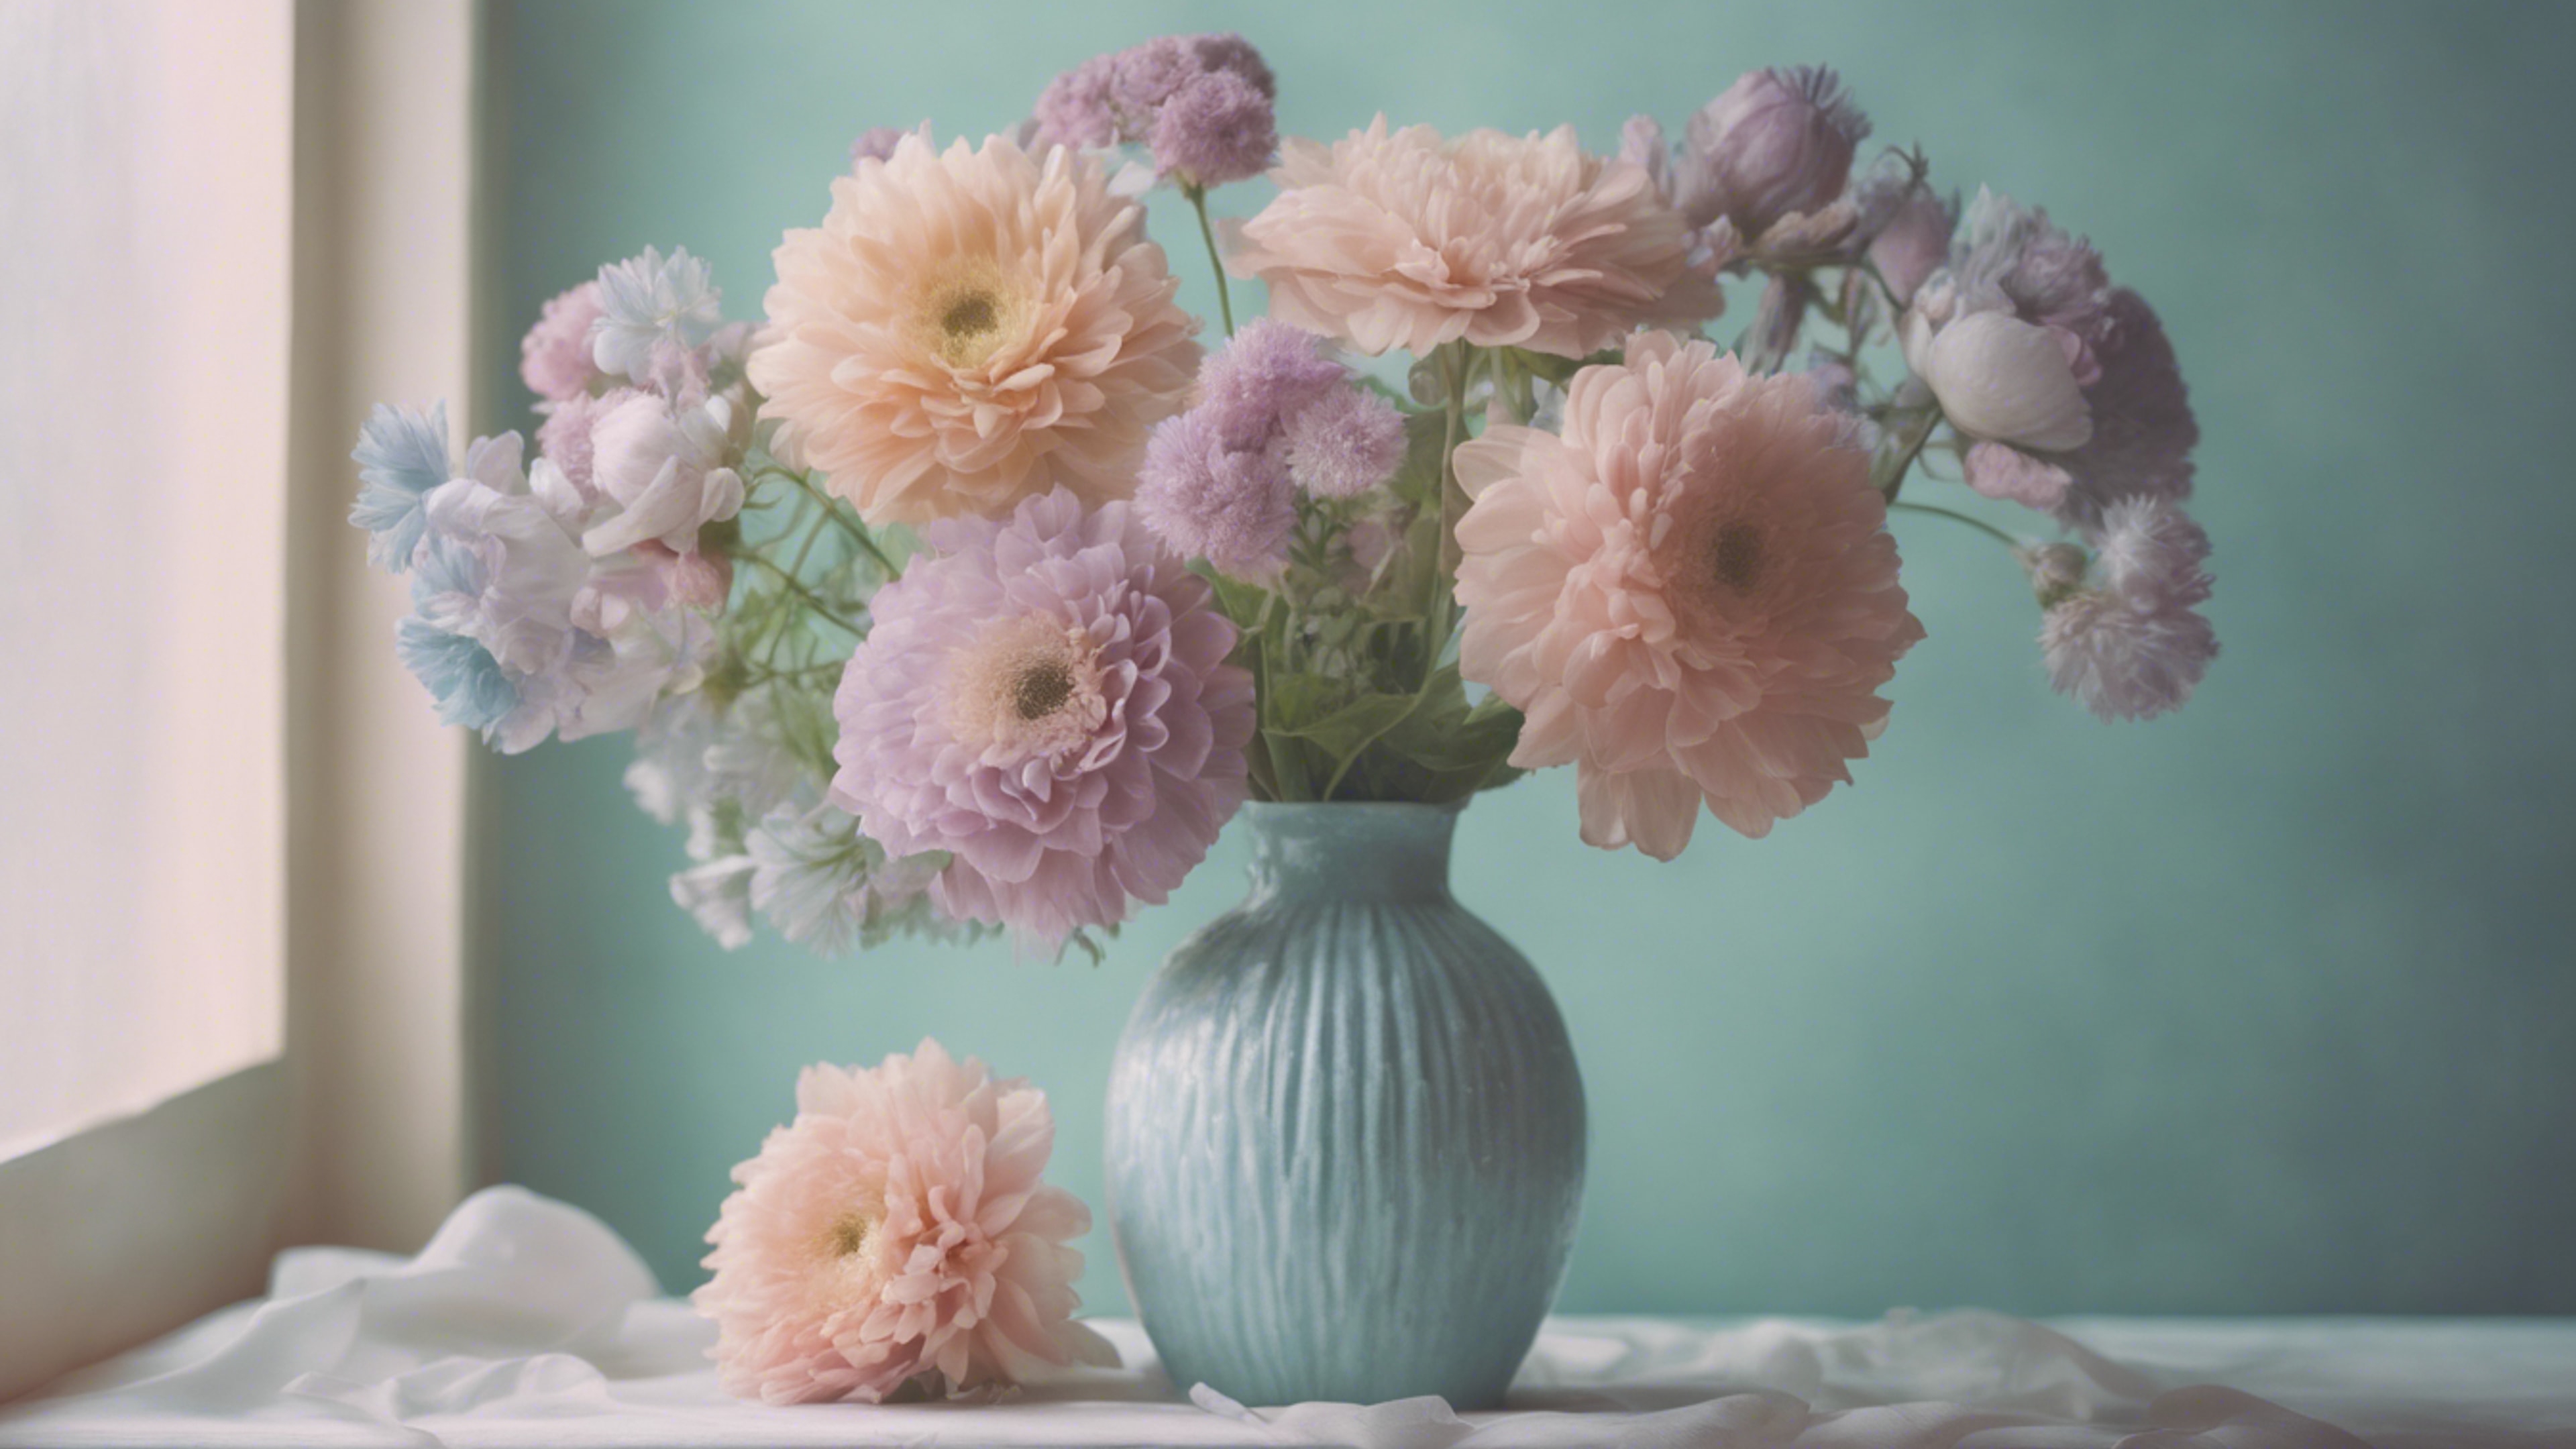 A pastel toned still-life painting featuring cool pastel colored flowers in a vase. Kertas dinding[6e1327f815a34bc2b32b]